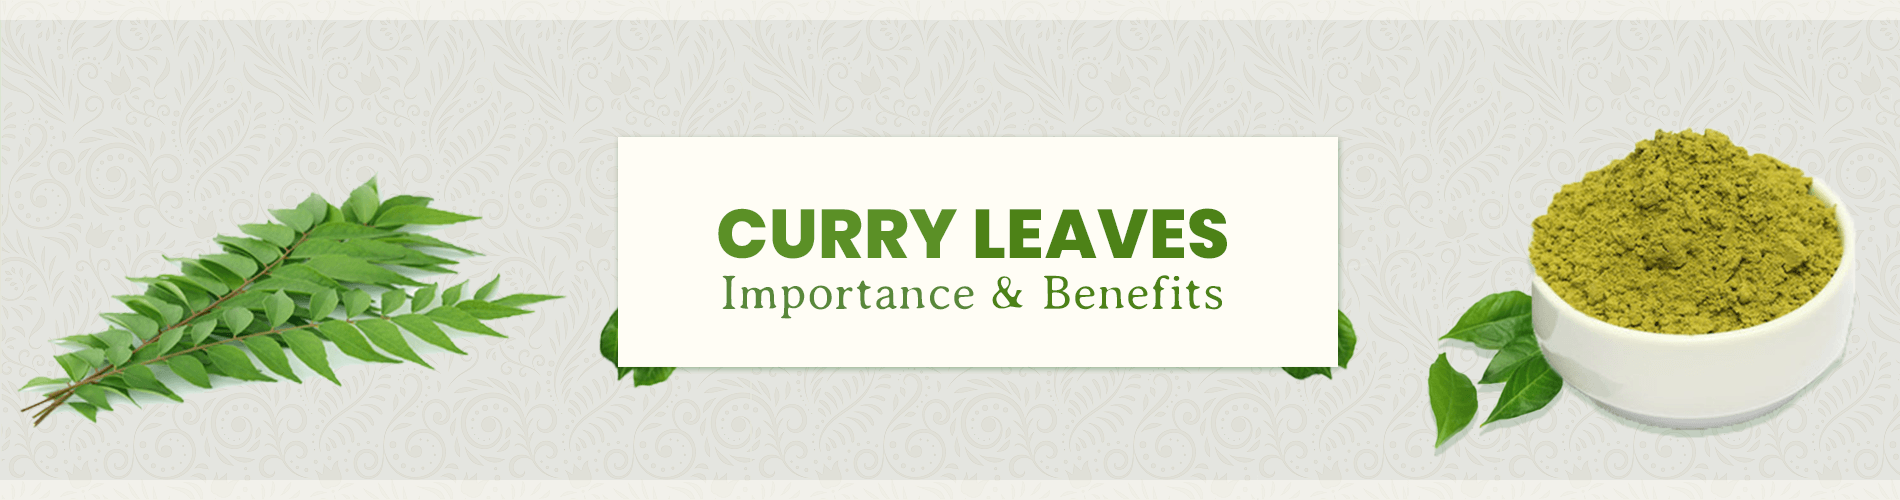 Curry Leaves-Importance & Benefits